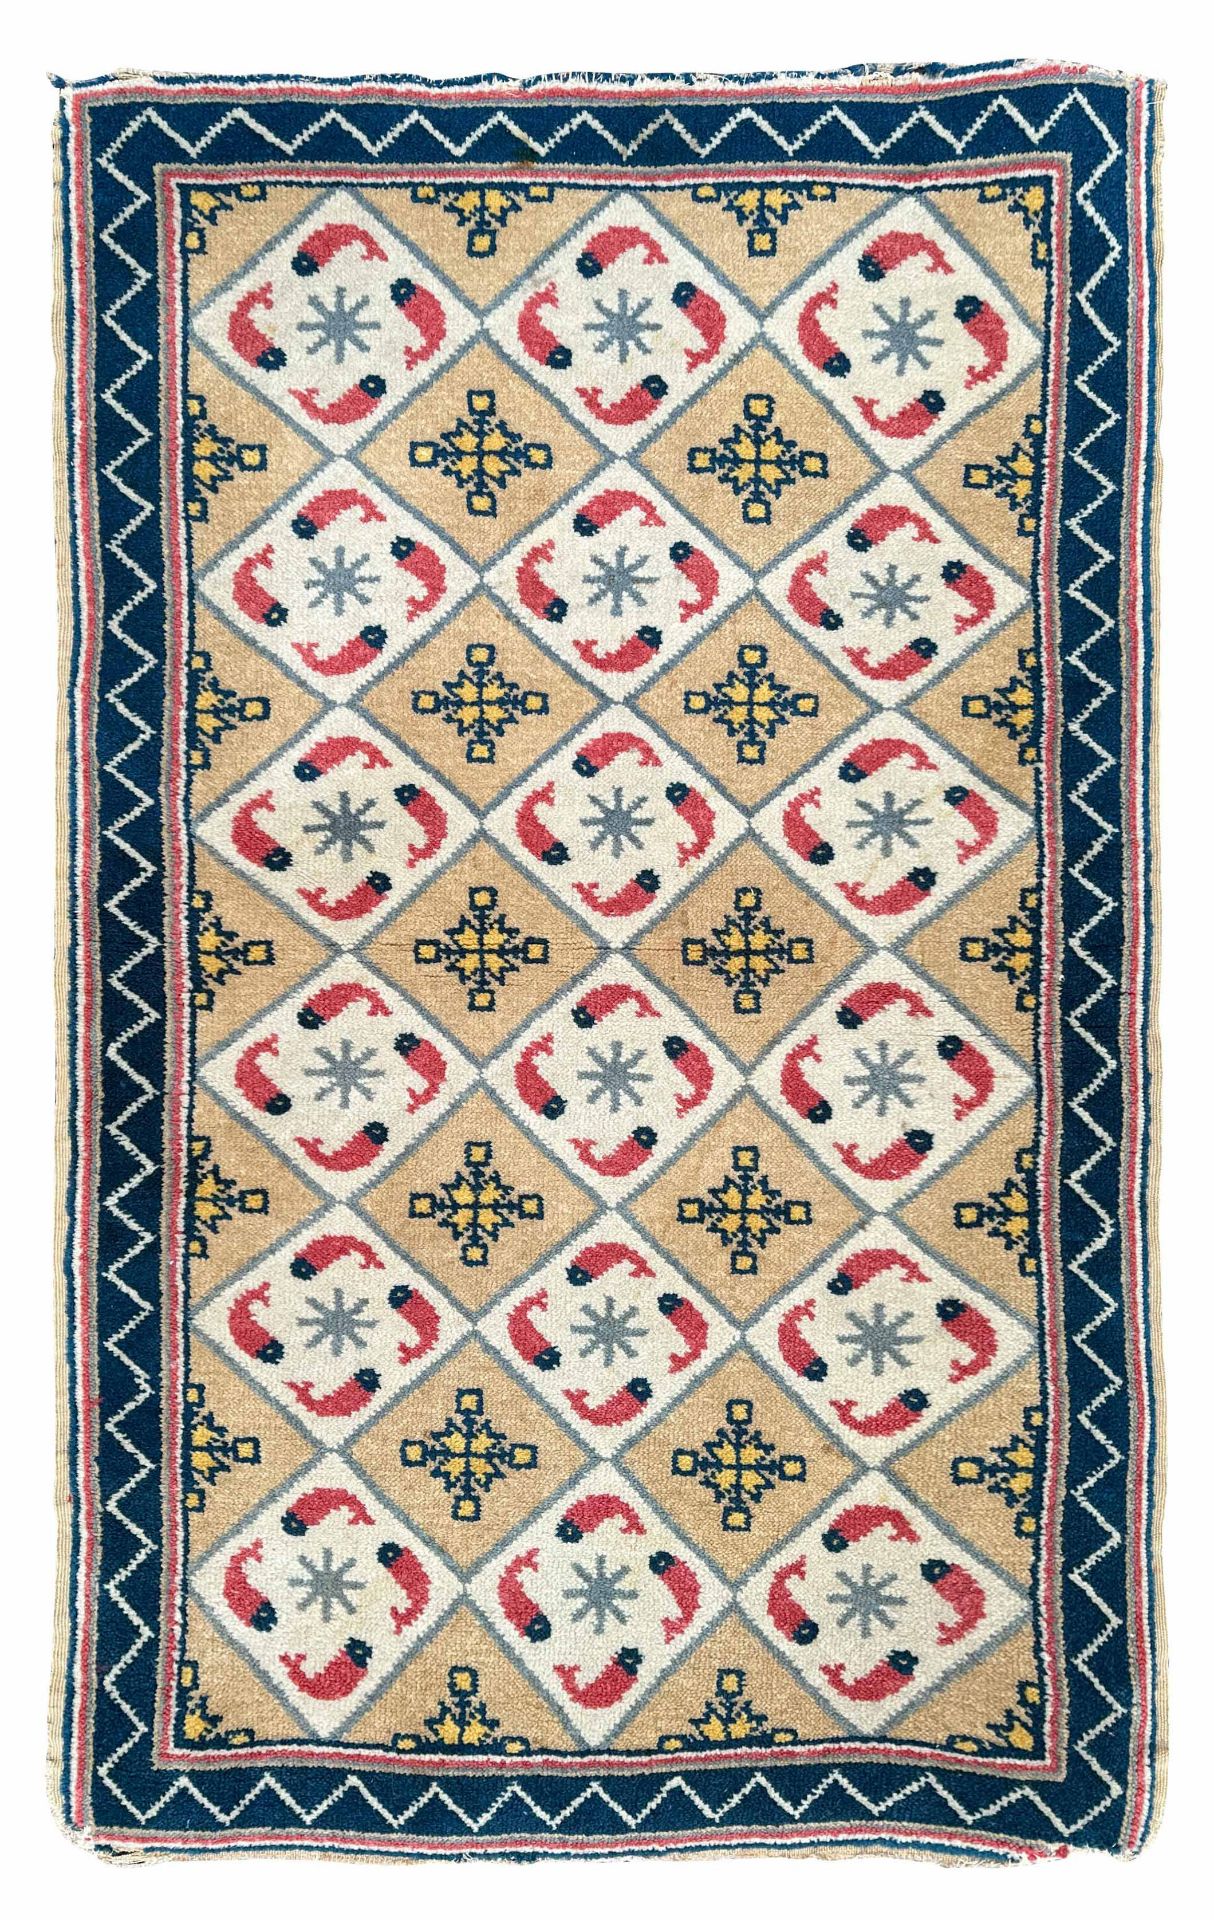 Fish country carpet. Pomerania. East Prussia. 1st half of the 20th century.